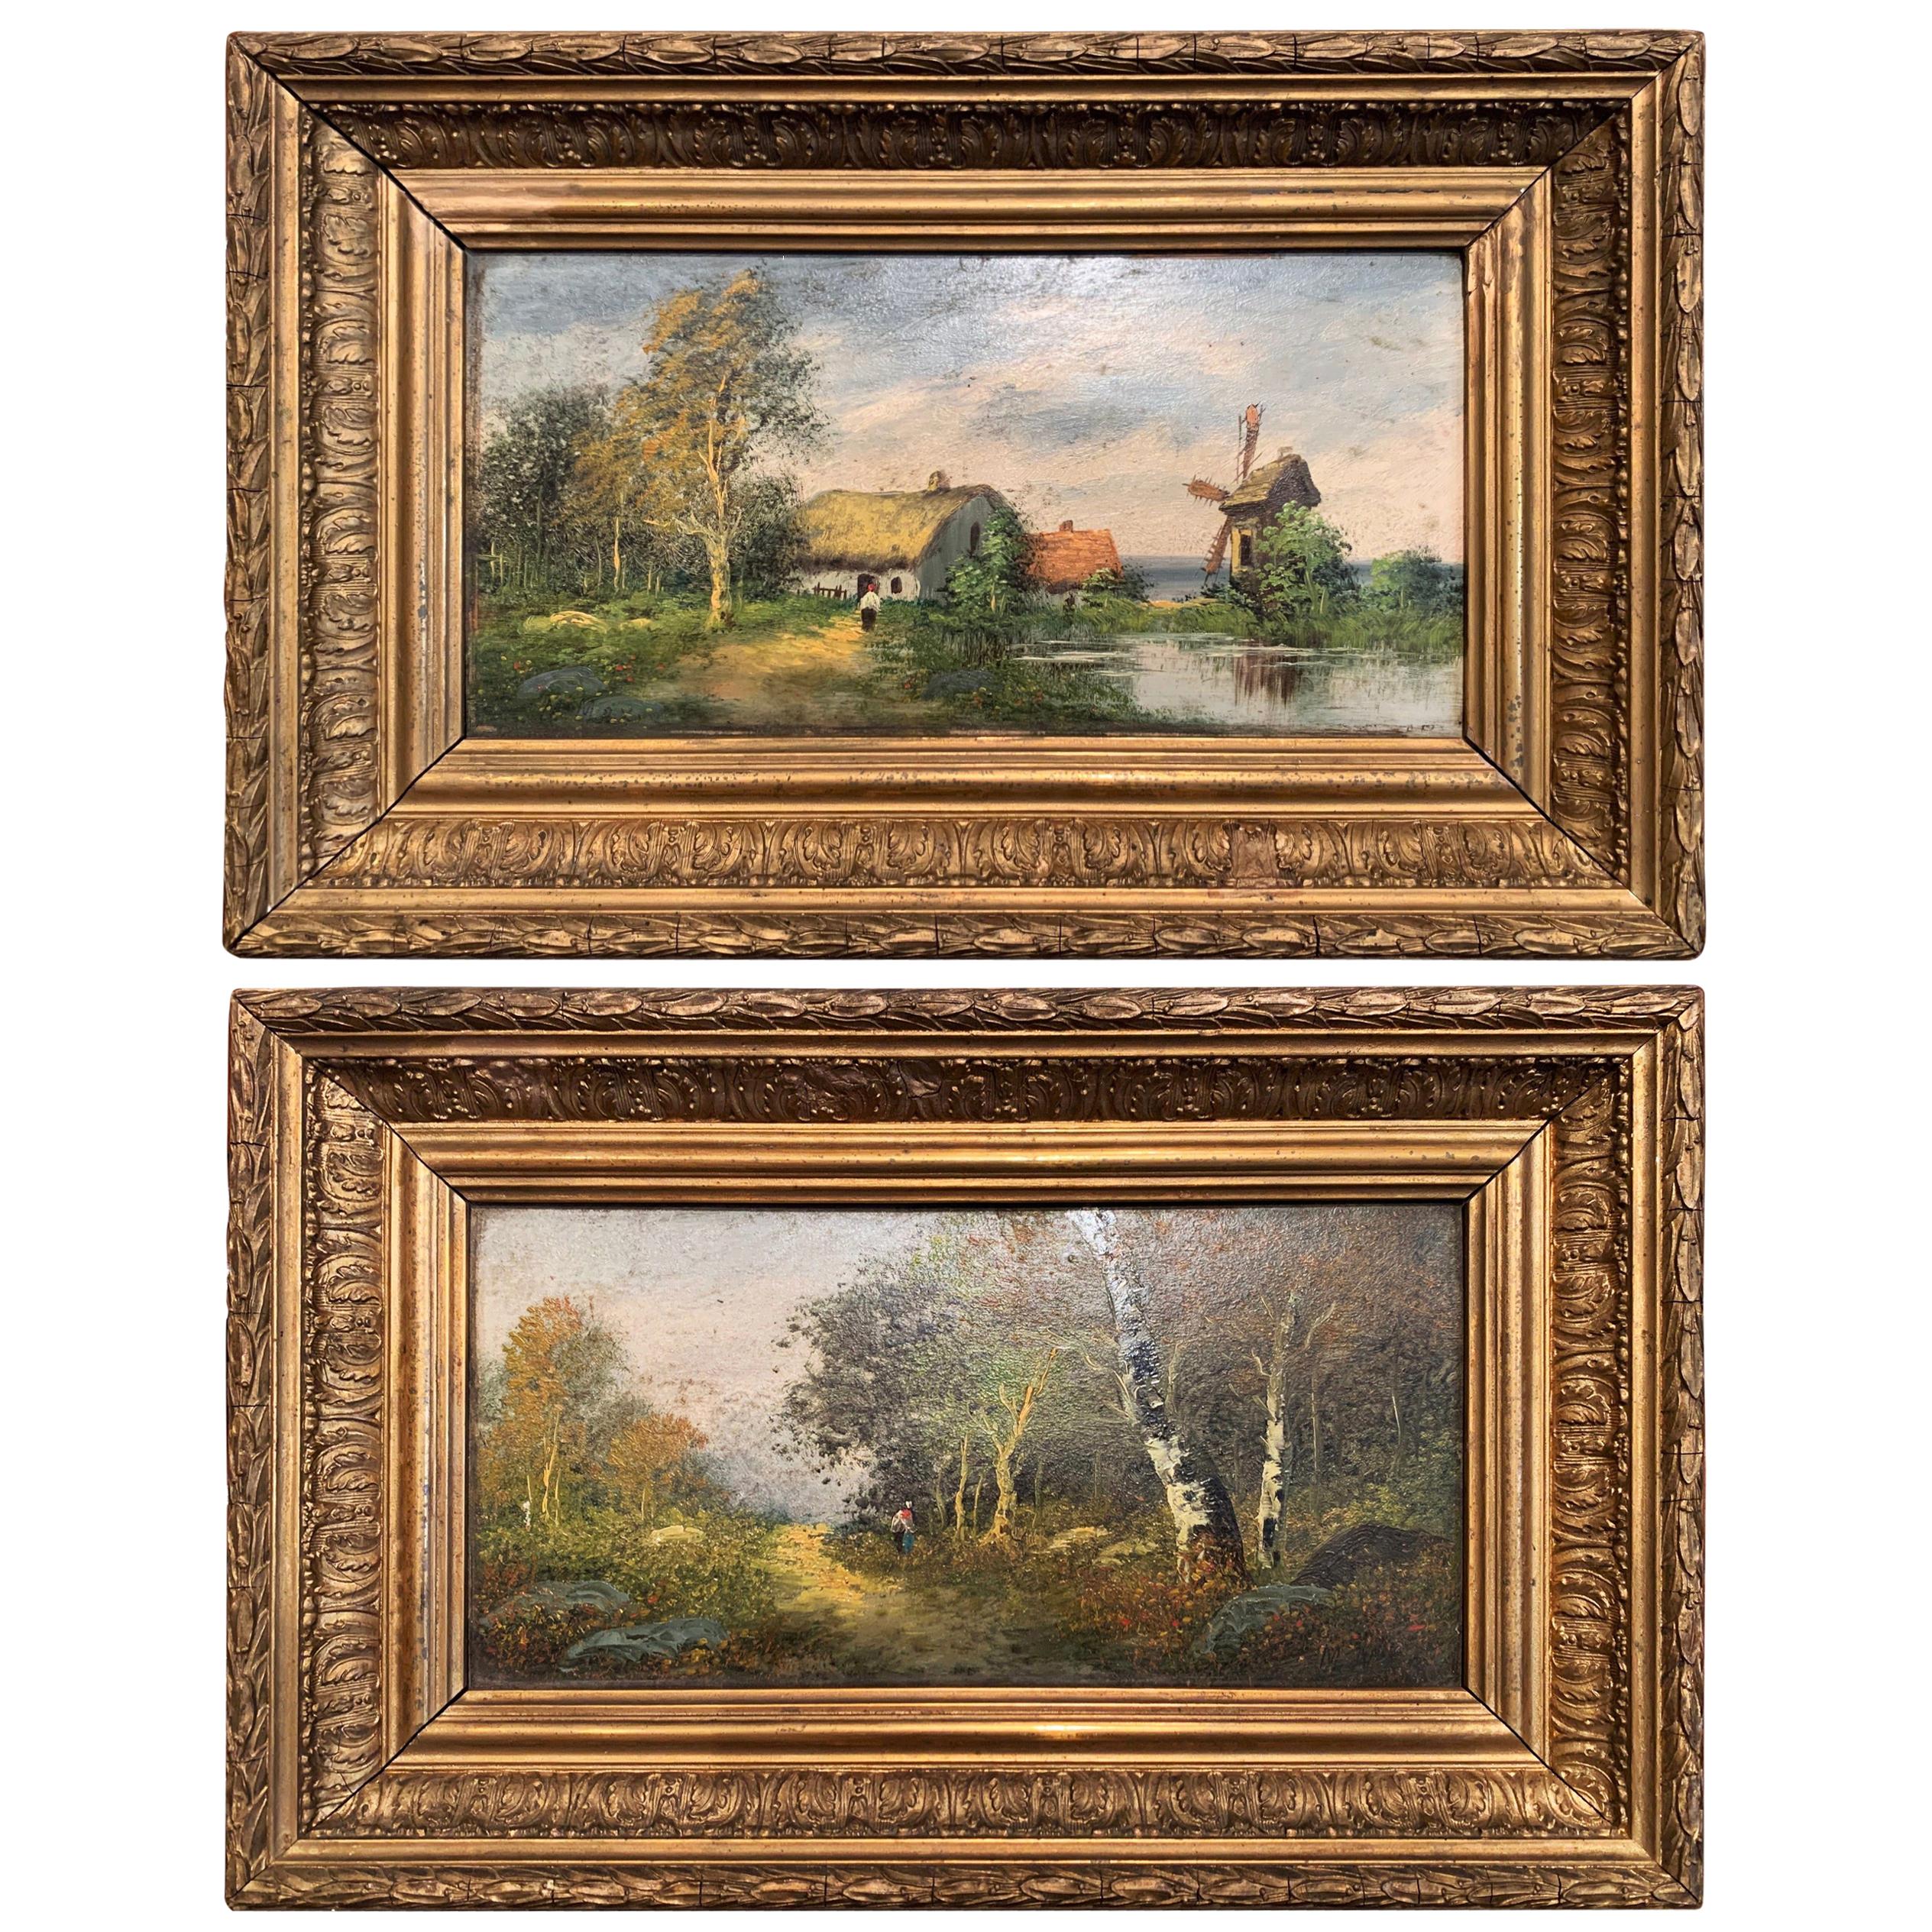 Pair of 19th Century French Landscape Paintings in Gilt Frames Signed M. Max